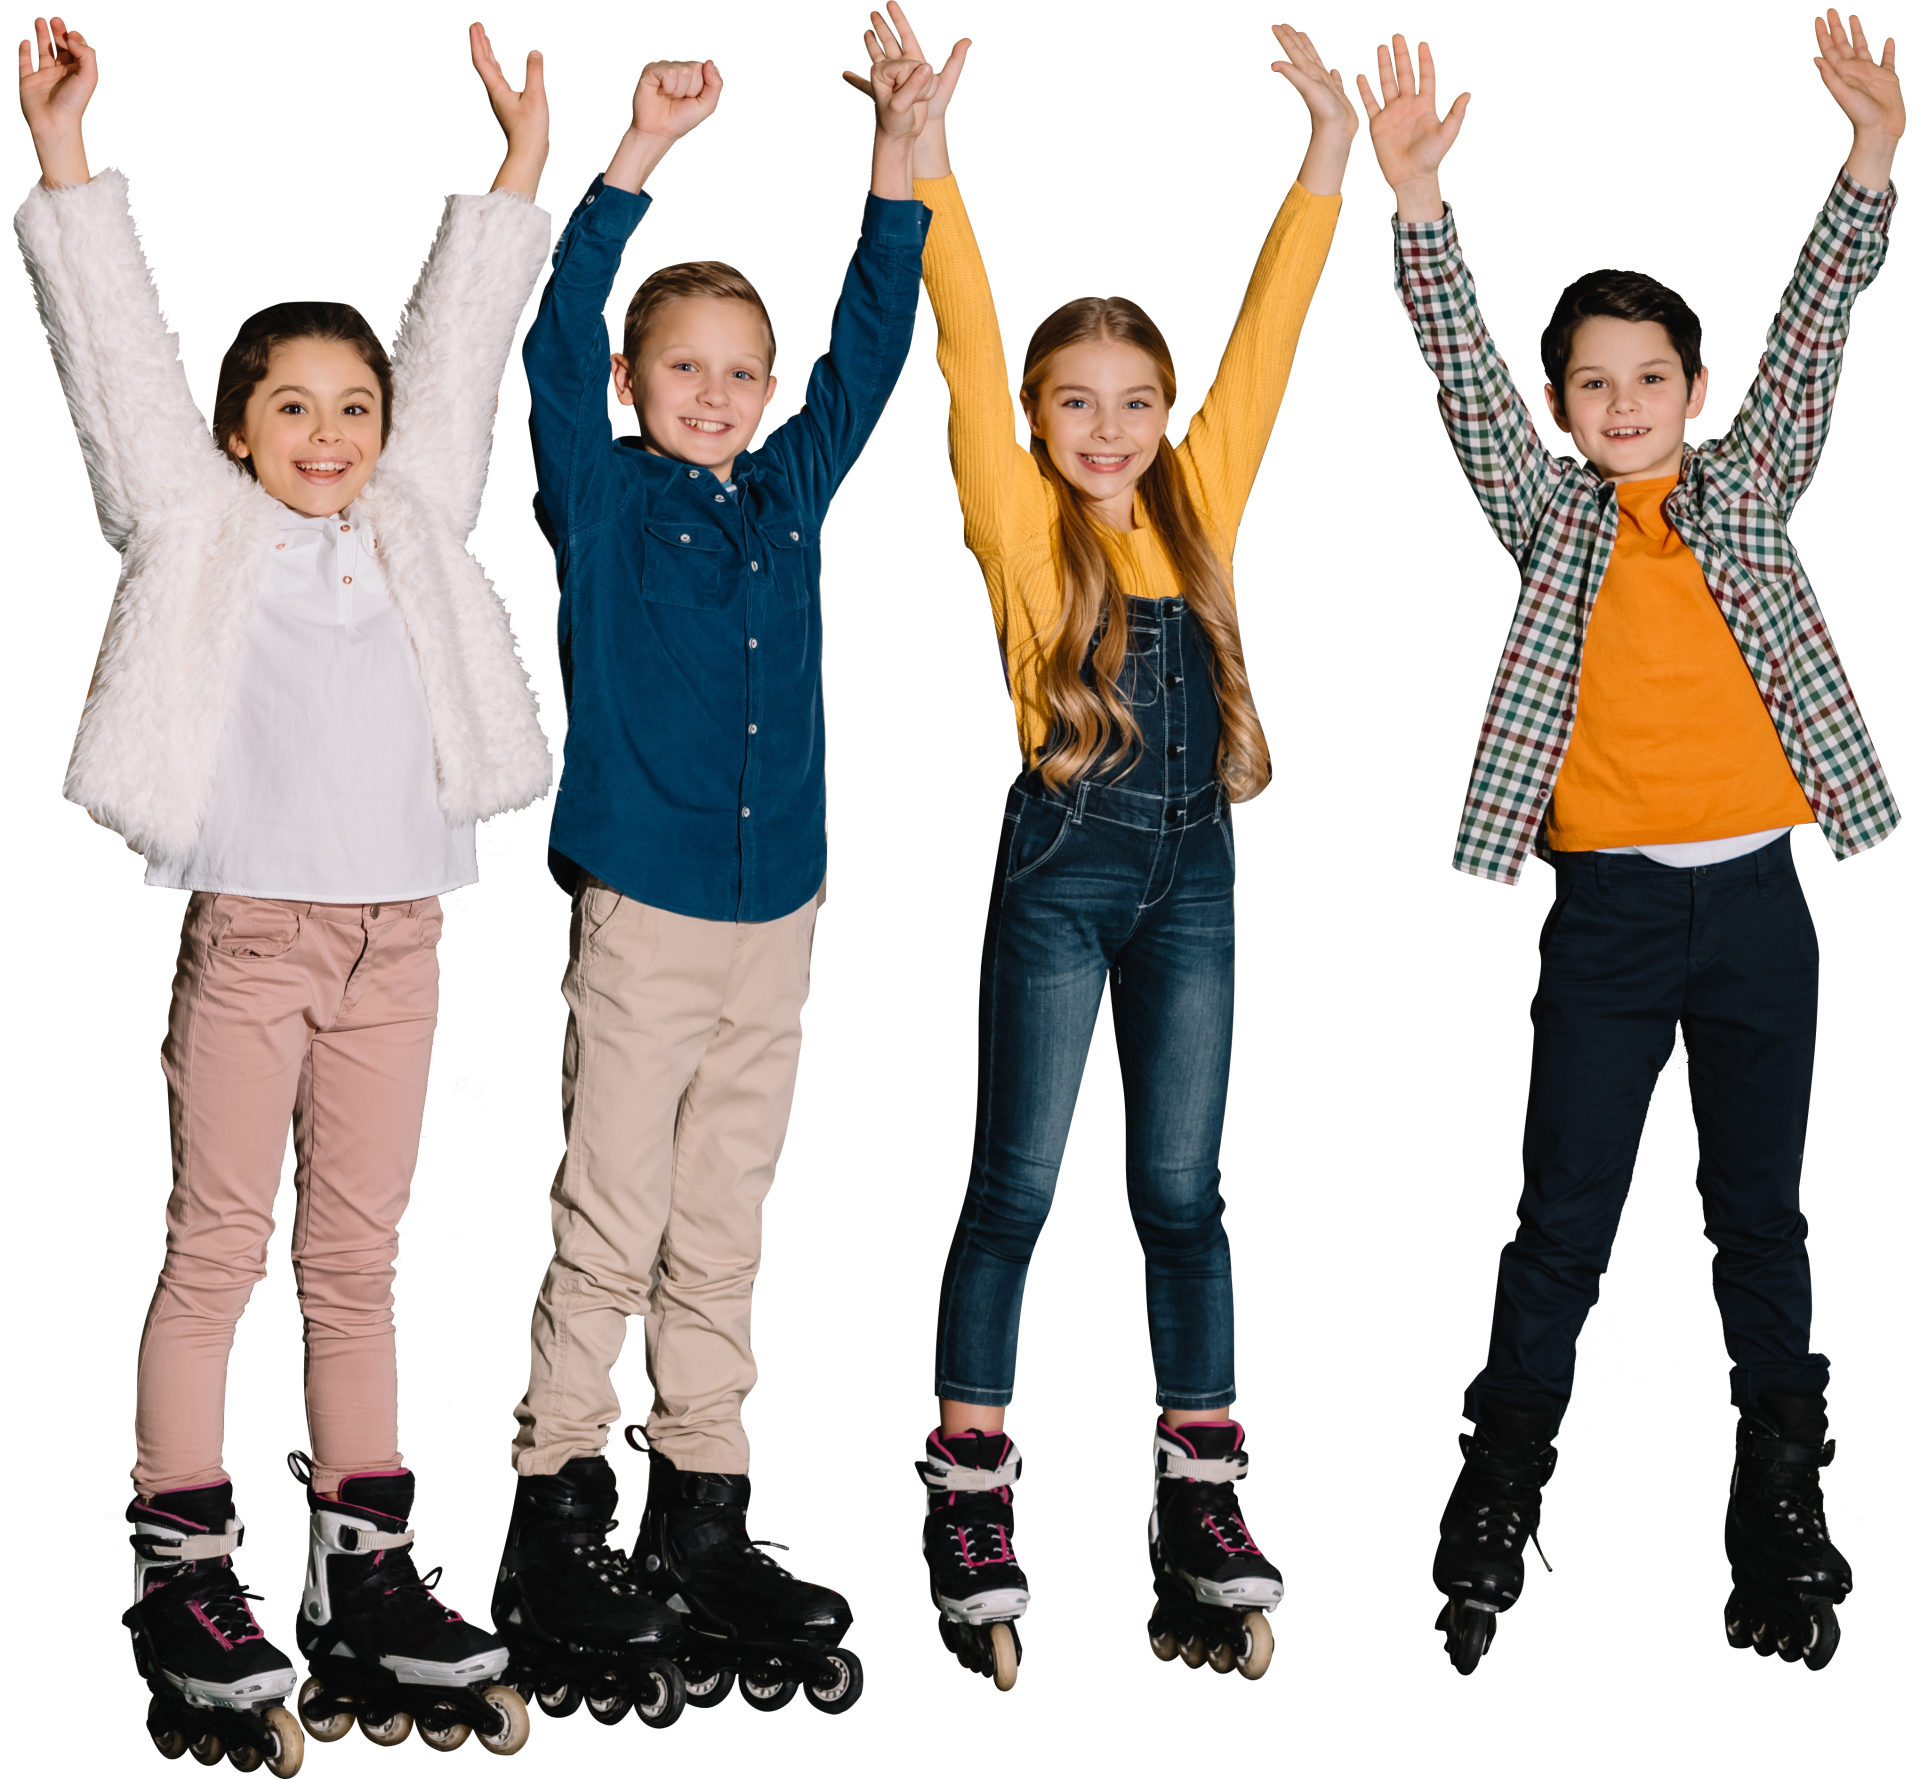 four children in roller skates with their arms raised